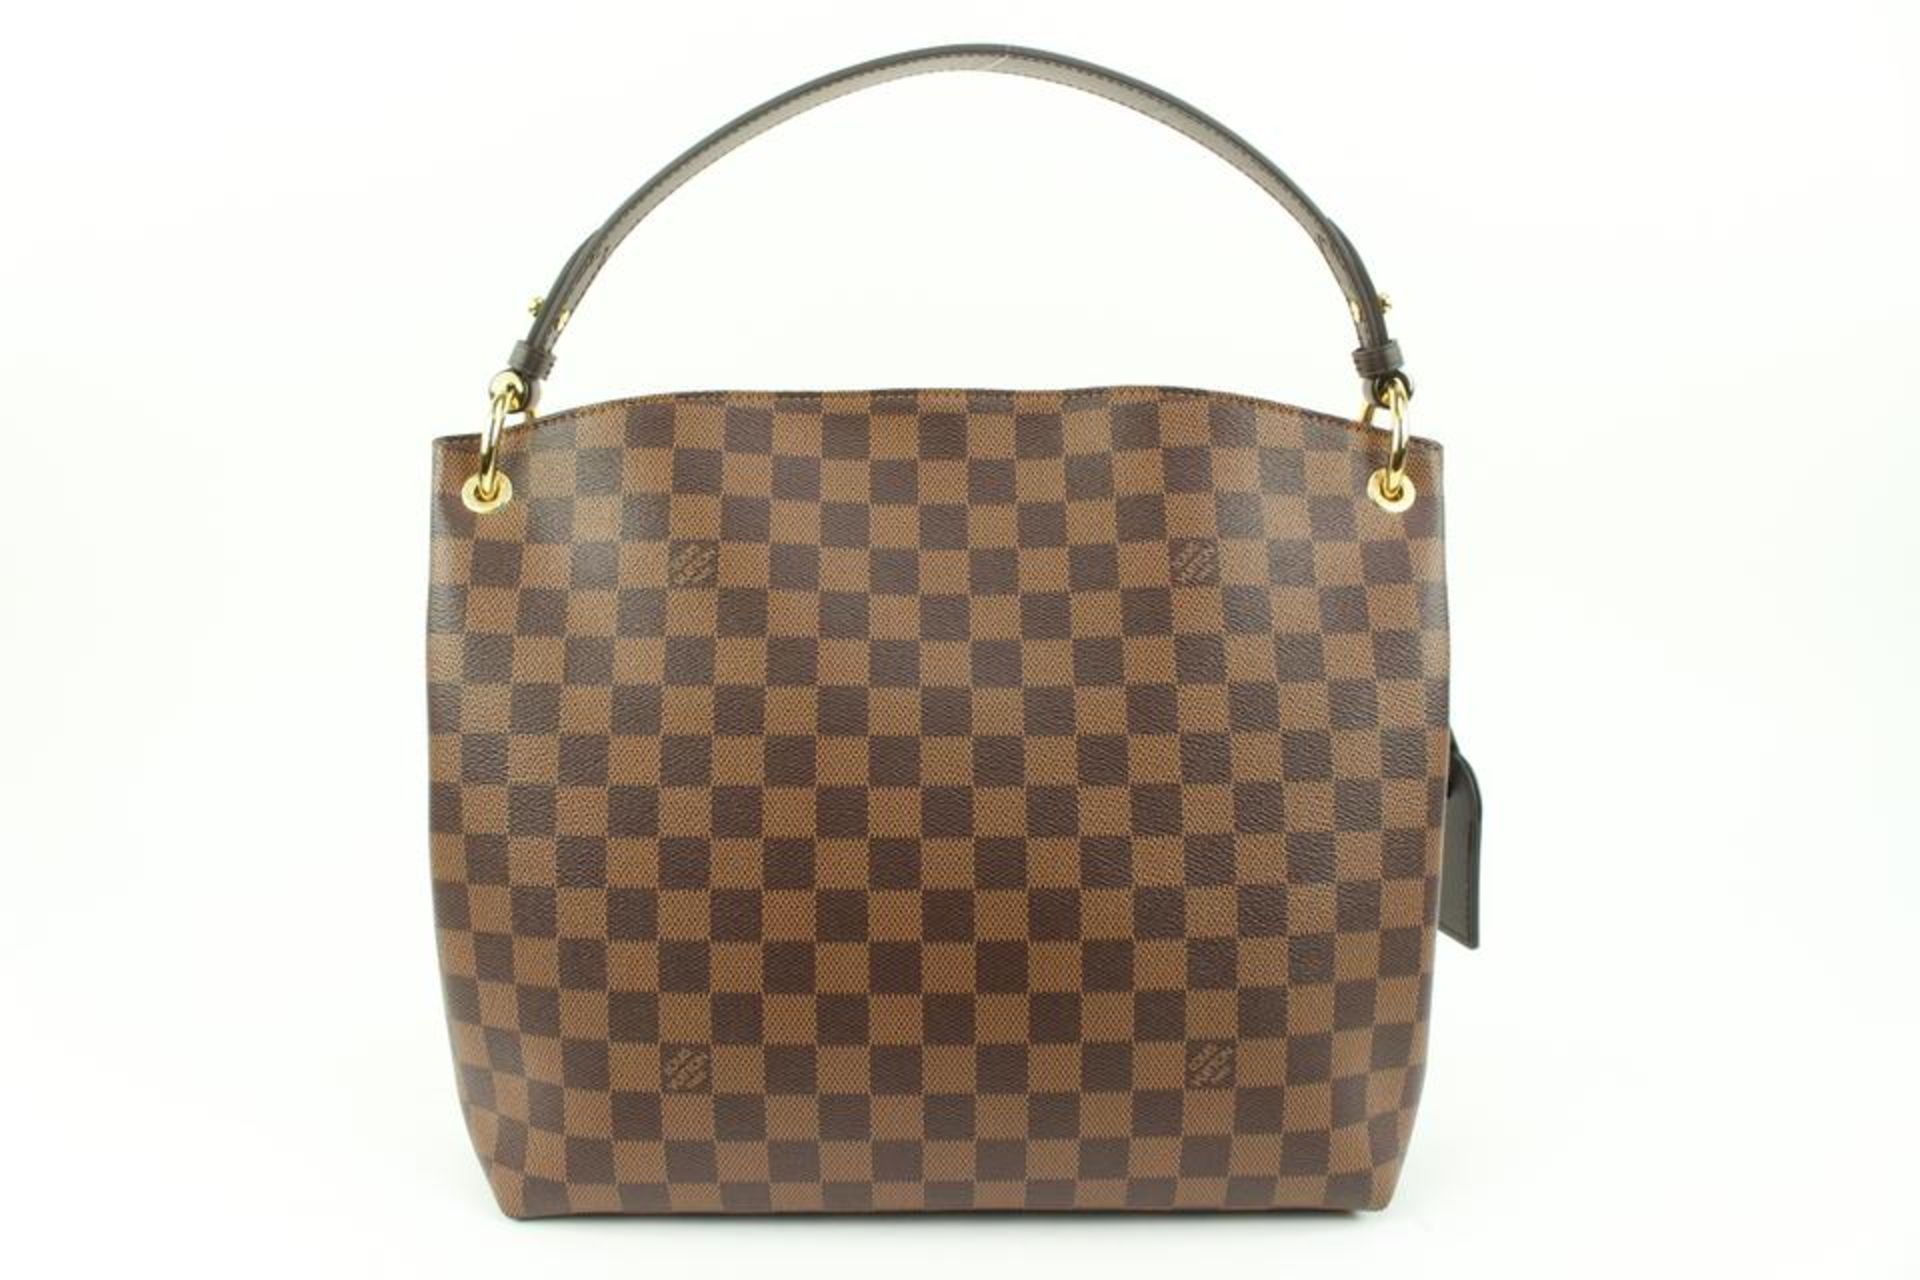 LOUIS VUITTON SOLD OUT EVERWHERE BRAND NEW DAMIER EBENE GRACEFUL PM HOBO - Image 11 of 15